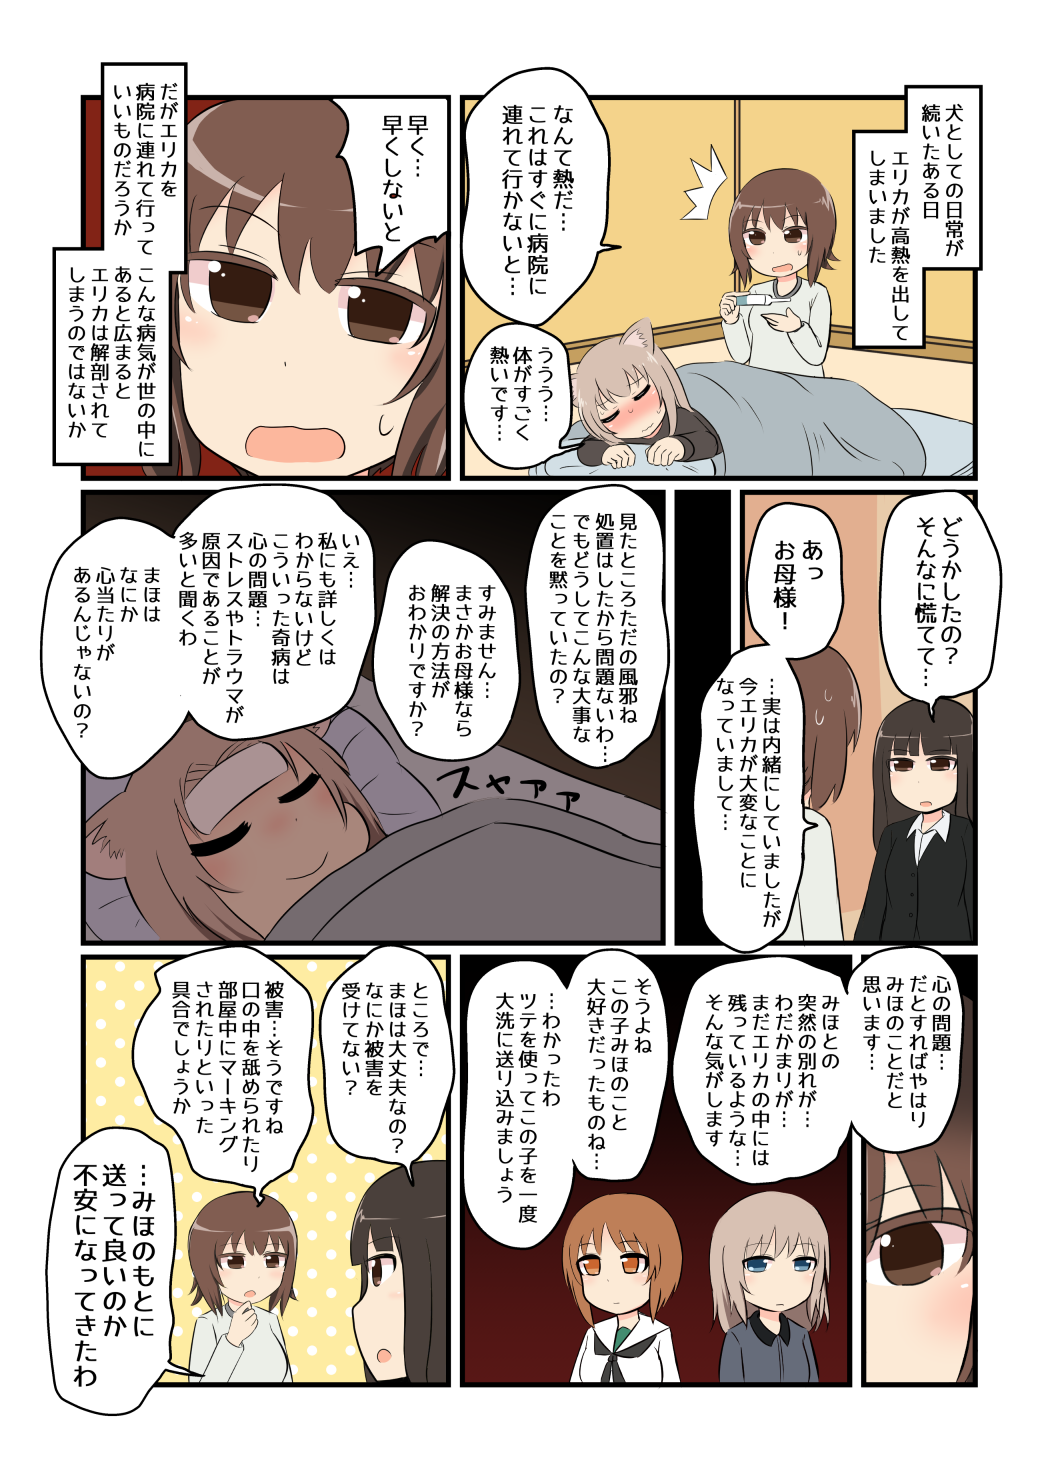 /\/\/\ 4girls alternate_costume animal_ears blue_eyes blush brown_eyes brown_hair casual comic dog_ears eyebrows eyebrows_visible_through_hair fever formal girls_und_panzer highres itsumi_erika kemonomimi_mode long_hair long_sleeves michiyon mother_and_daughter multiple_girls nishizumi_maho nishizumi_miho nishizumi_shiho open_mouth school_uniform shaded_face short_hair sick sleeping speech_bubble translation_request under_covers